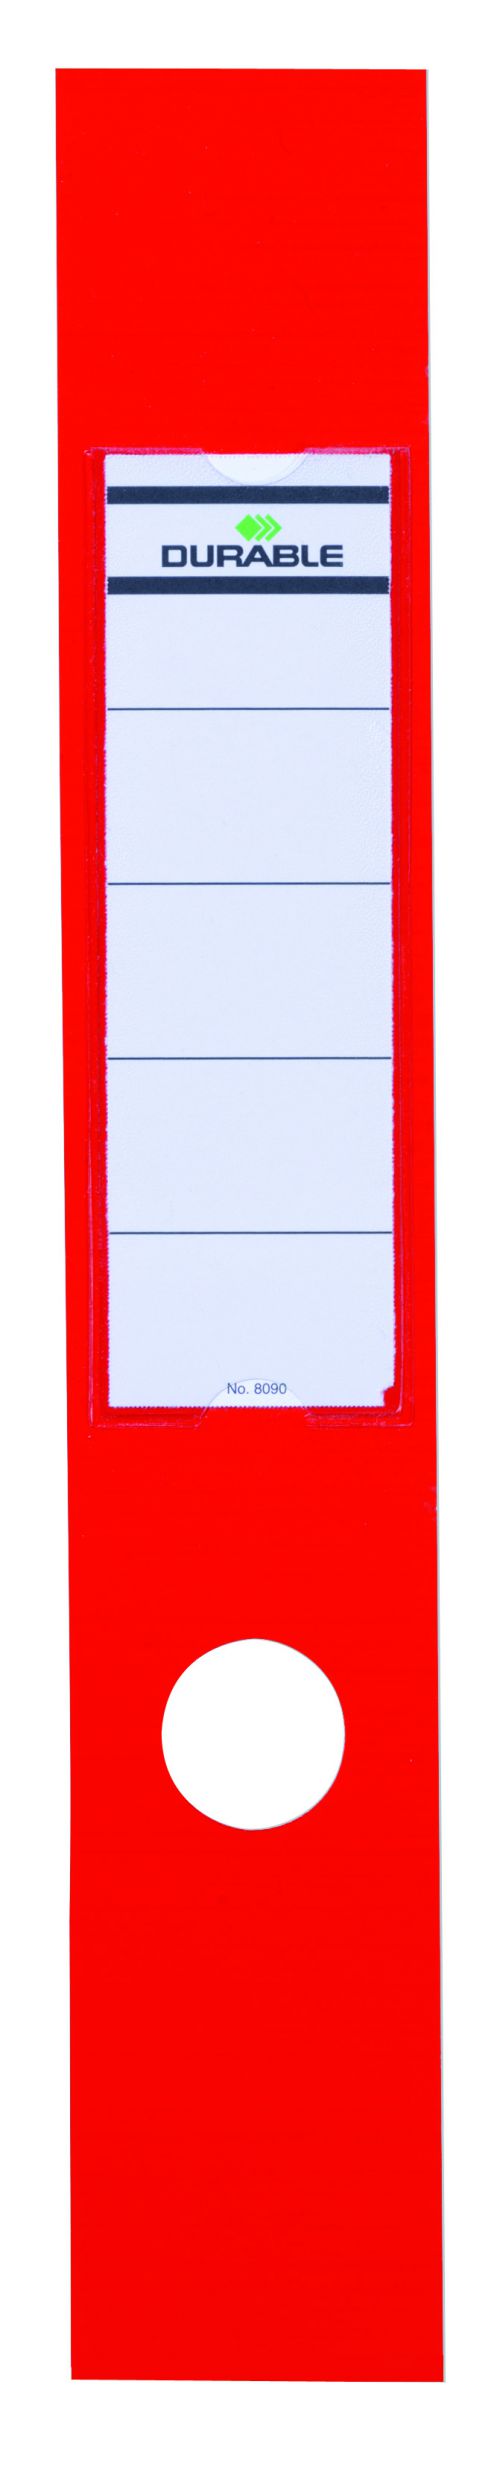 Durable Ordofix Lever Arch File Spine Label PVC 60x390mm Red (Pack 10) - 809003